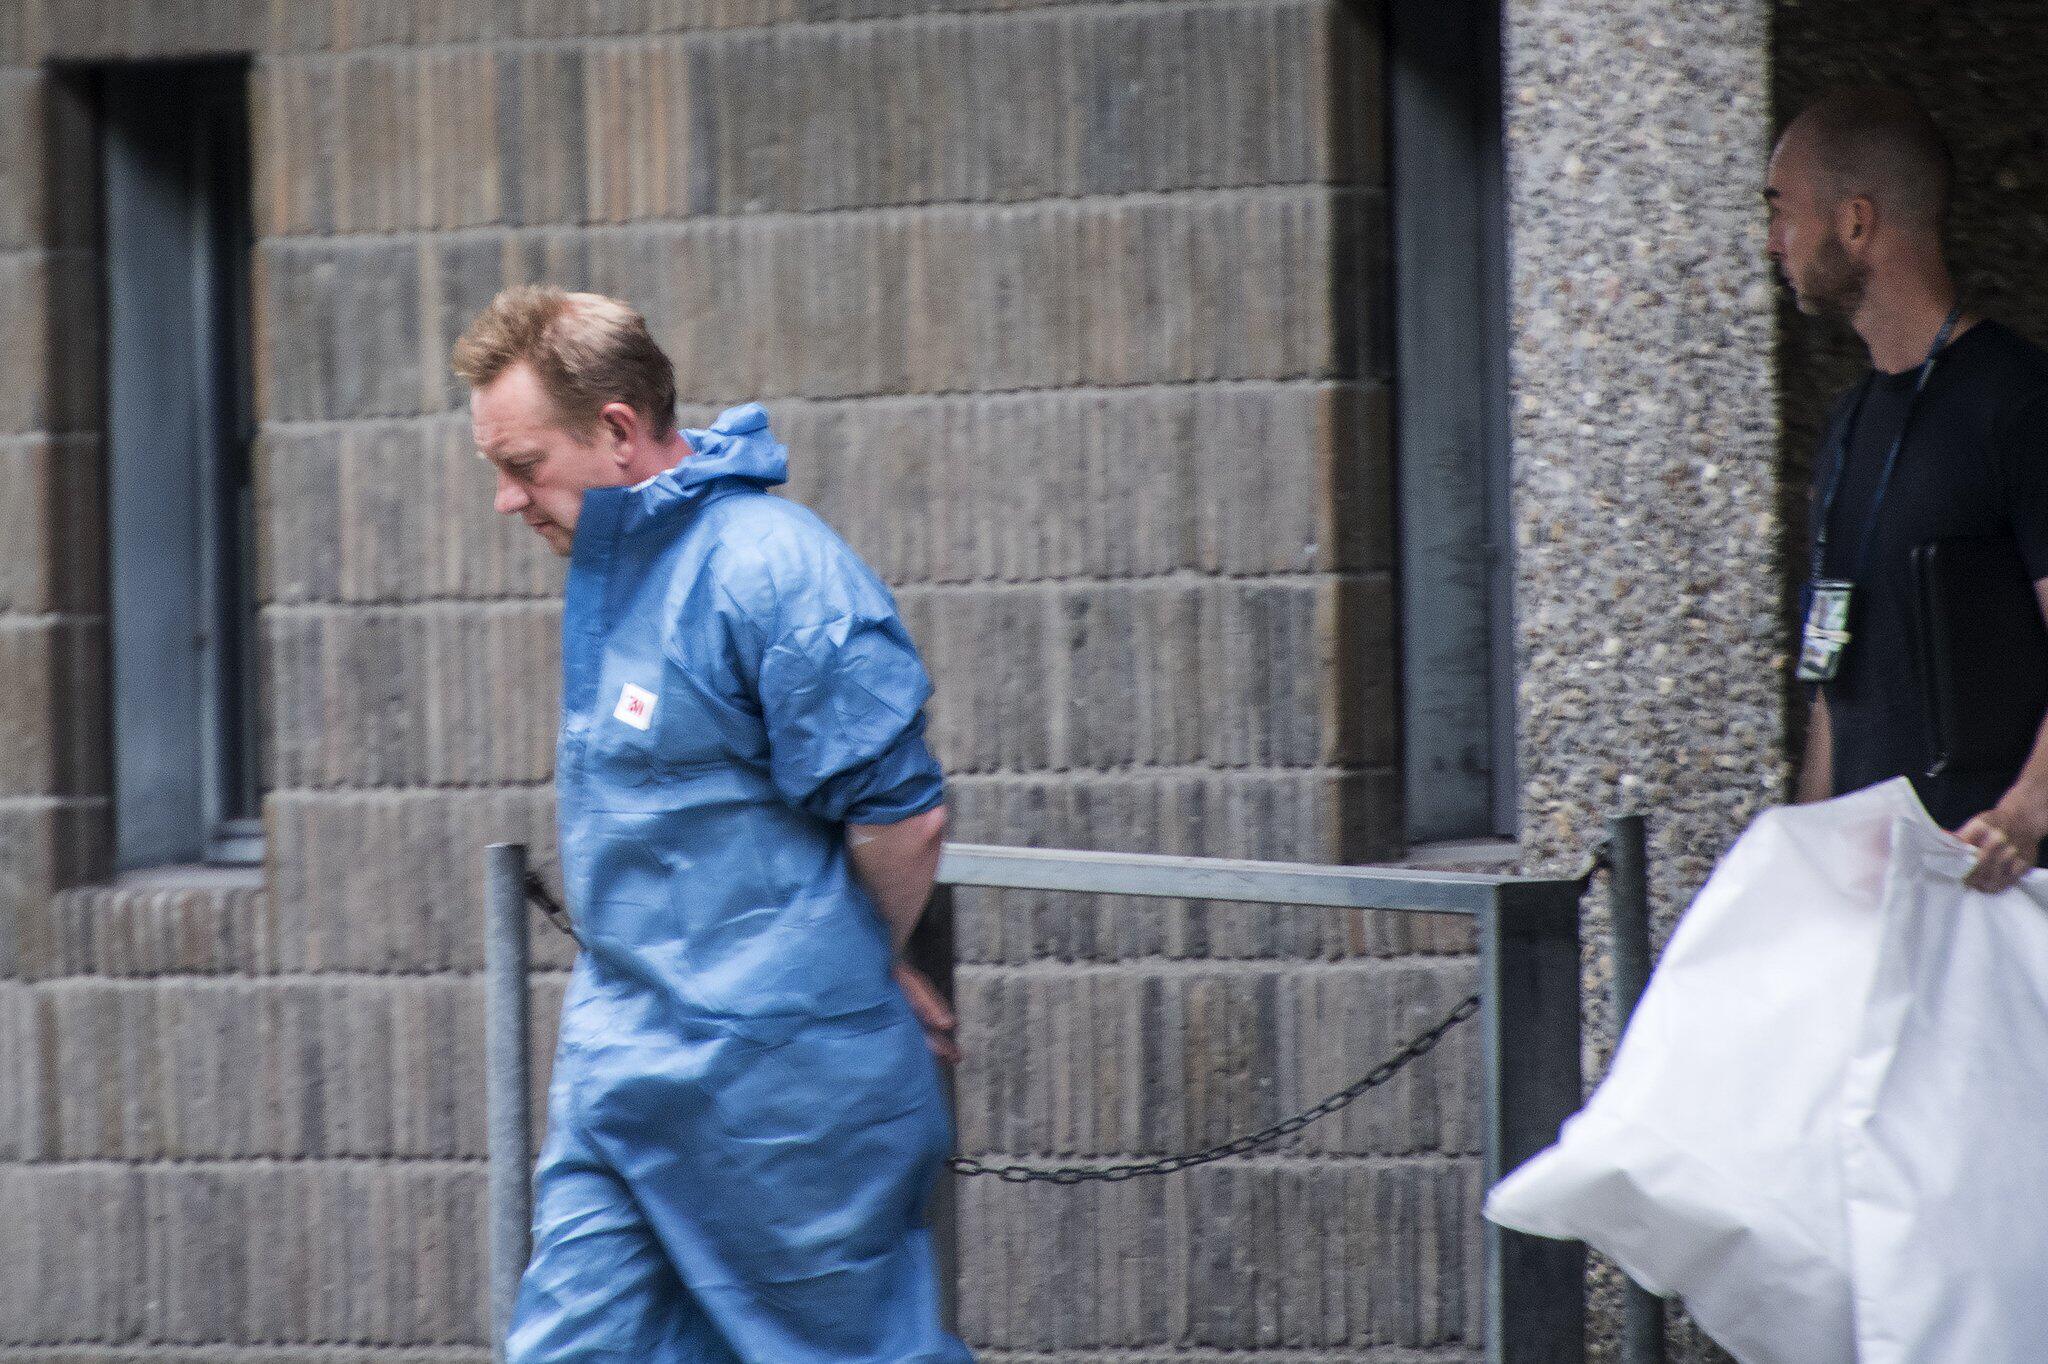  Peter Madsen, a Danish inventor and engineer, is escorted in a blue jumpsuit by police into a courthouse for his trial for the murder and dismemberment of Swedish journalist Kim Wall in August 2017.